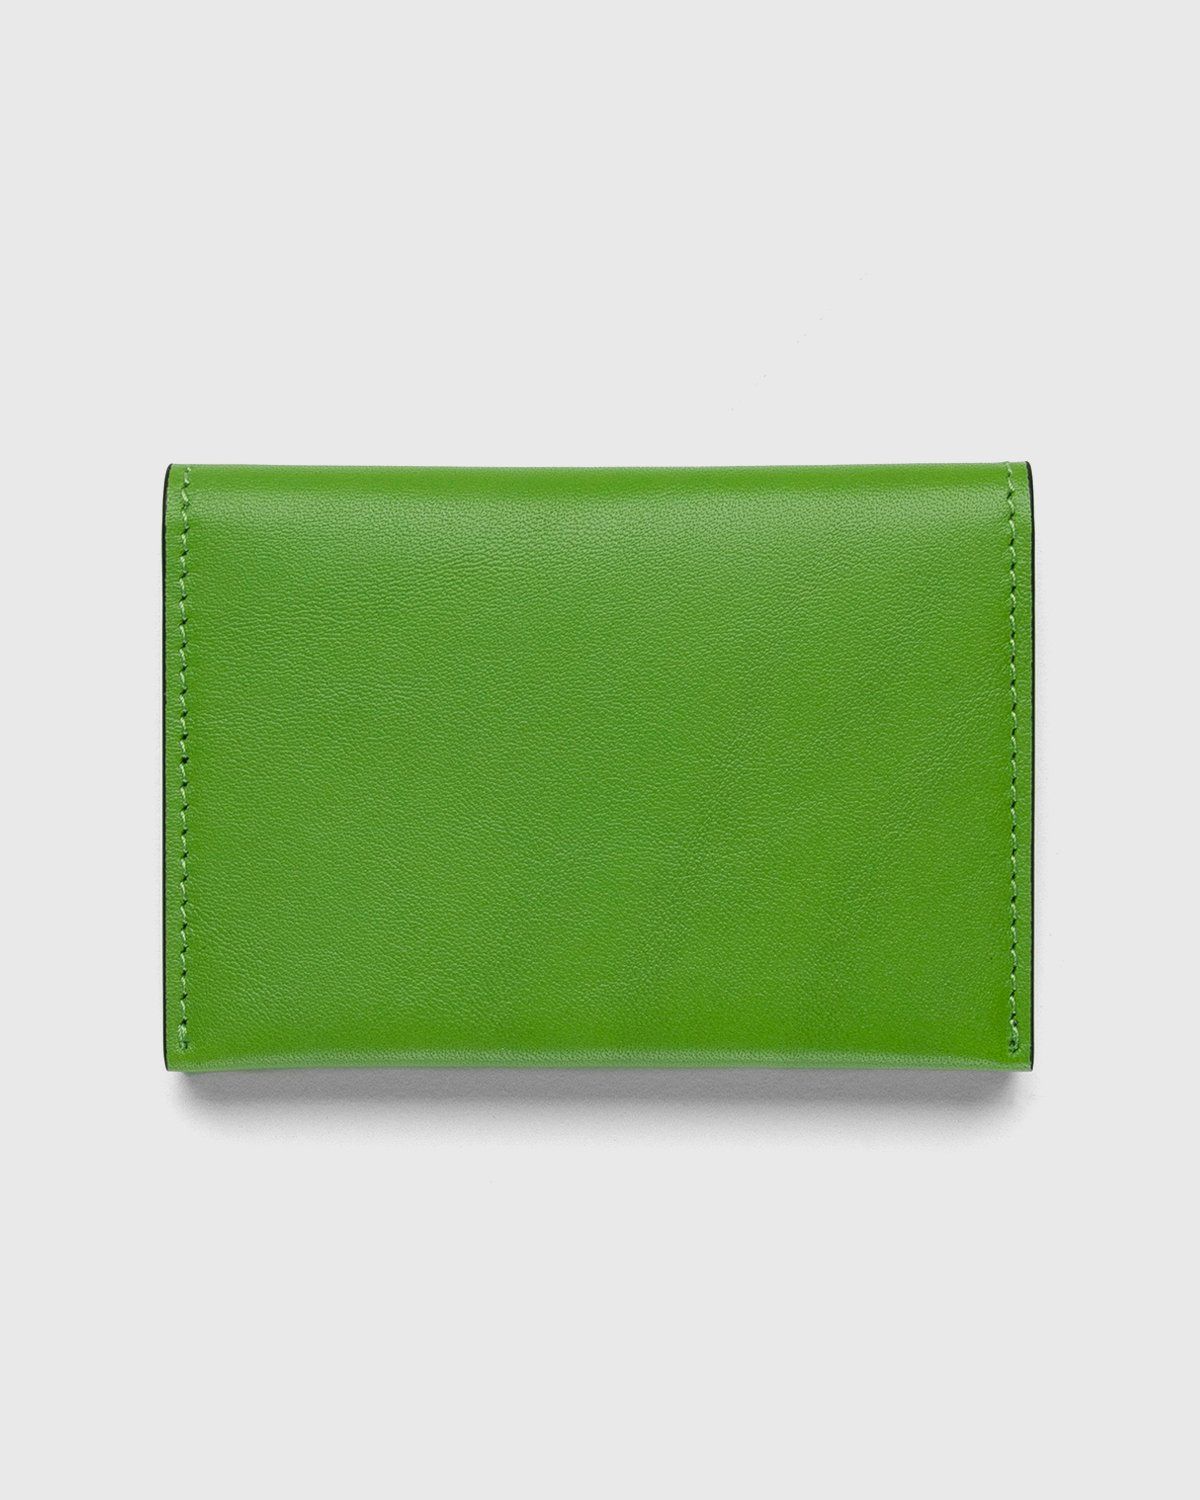 Acne Studios – Leather Card Case Multi Green - Wallets - Green - Image 2